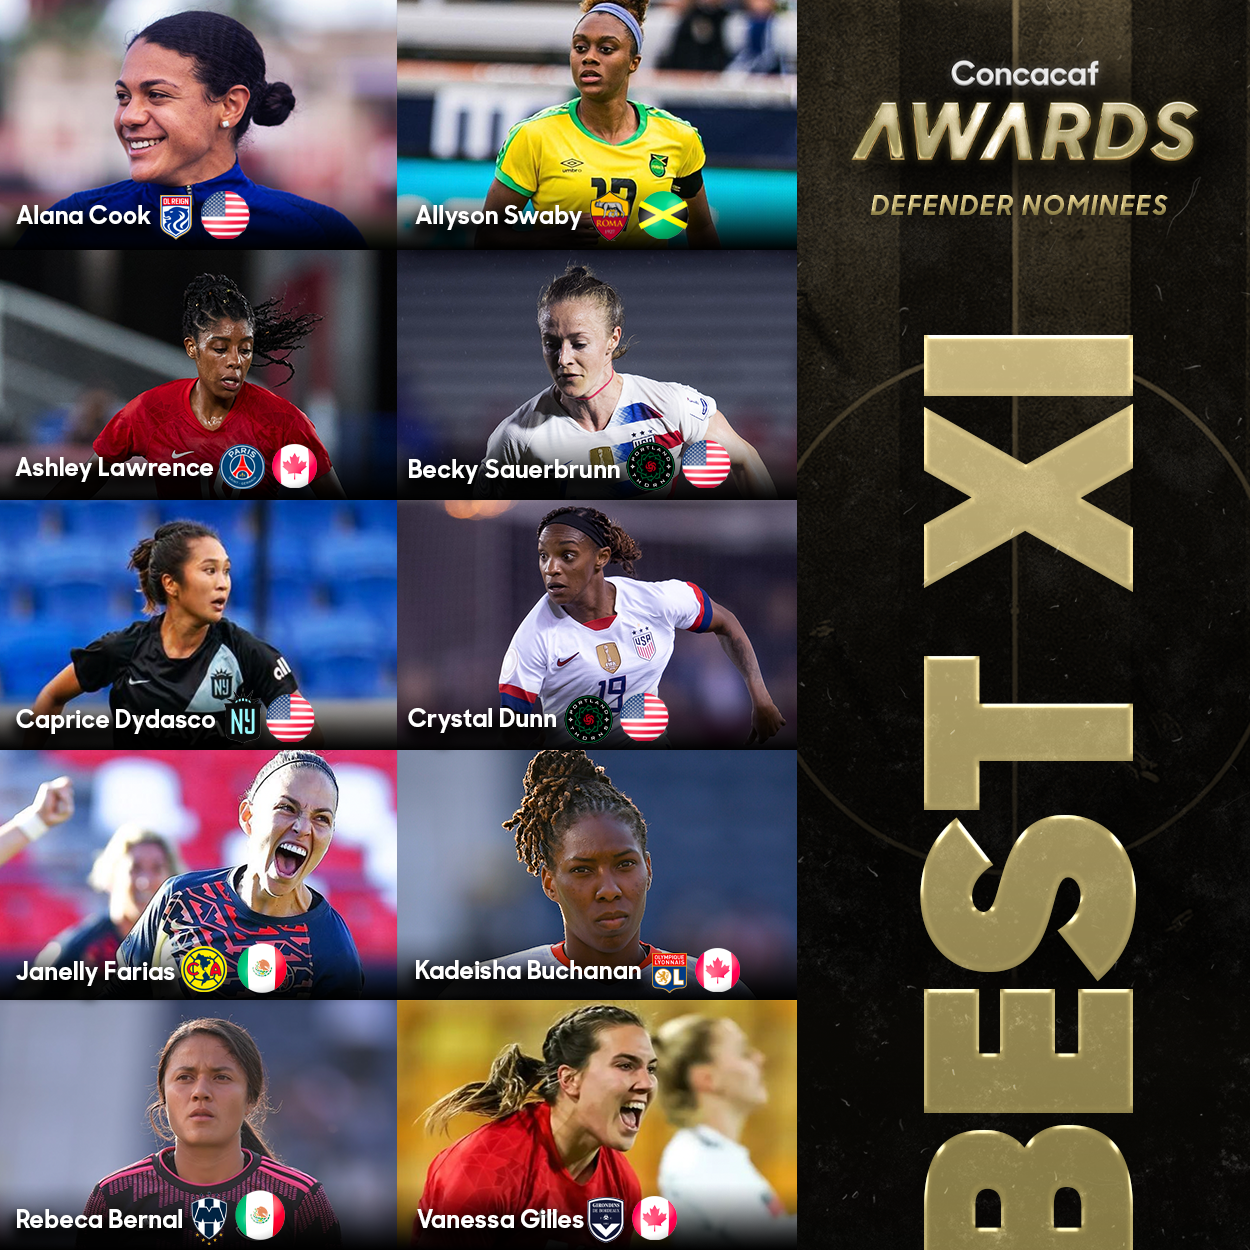 Here are the nominees defender for Canadian Premier League award